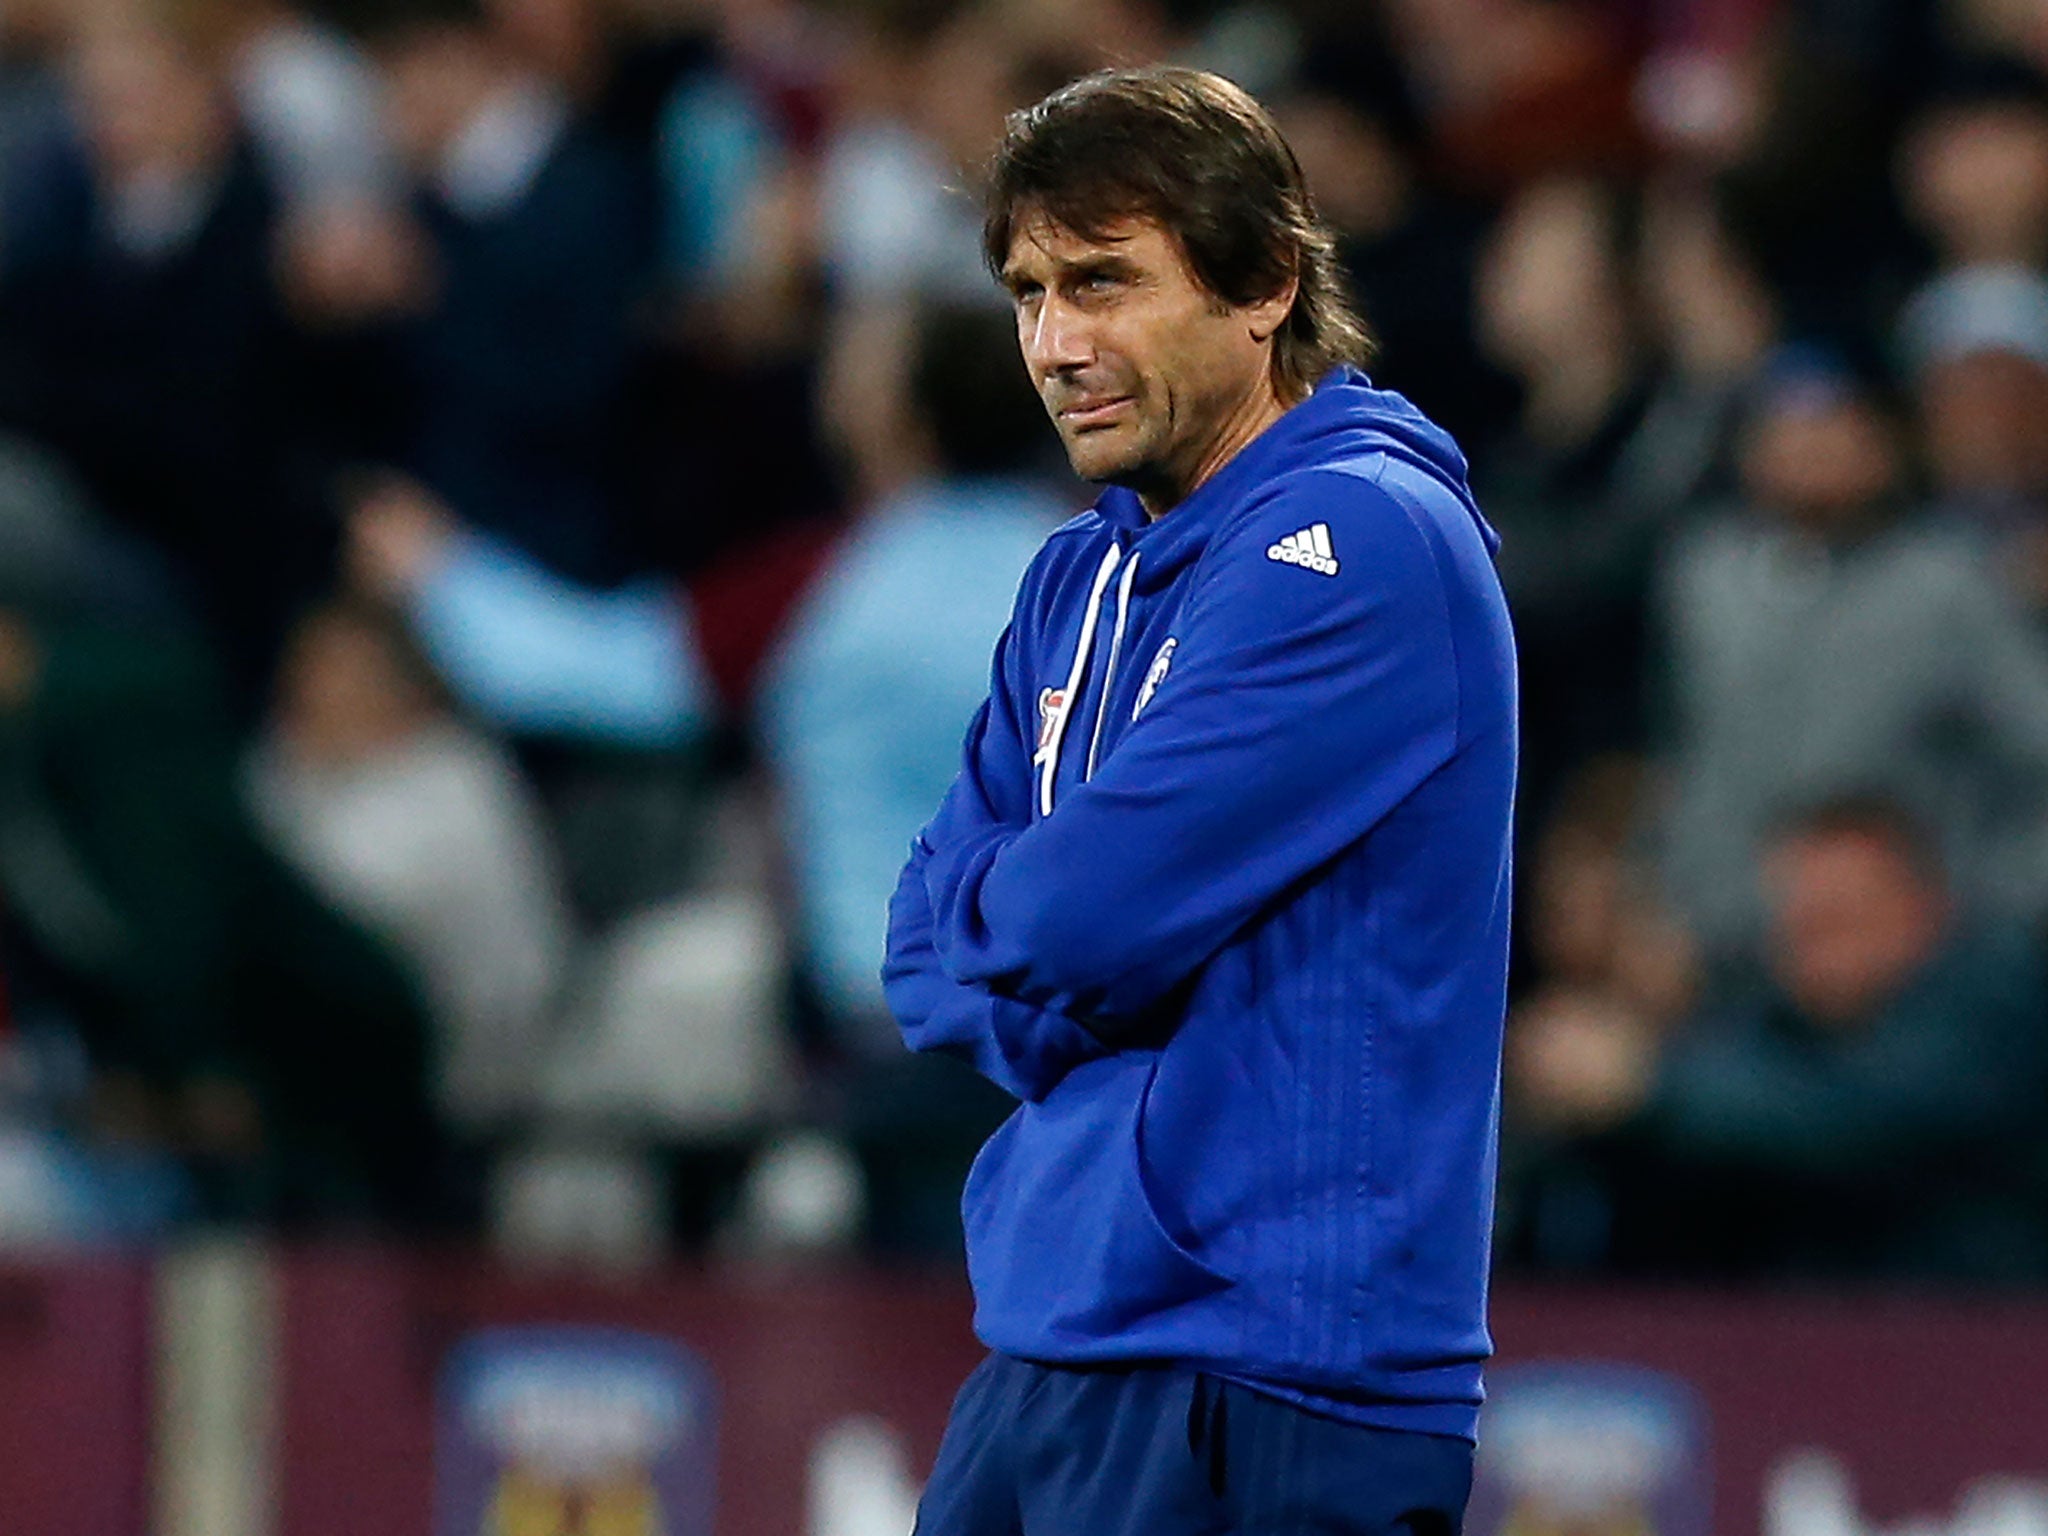 Antonio Conte does not hide his feelings on the sidelines